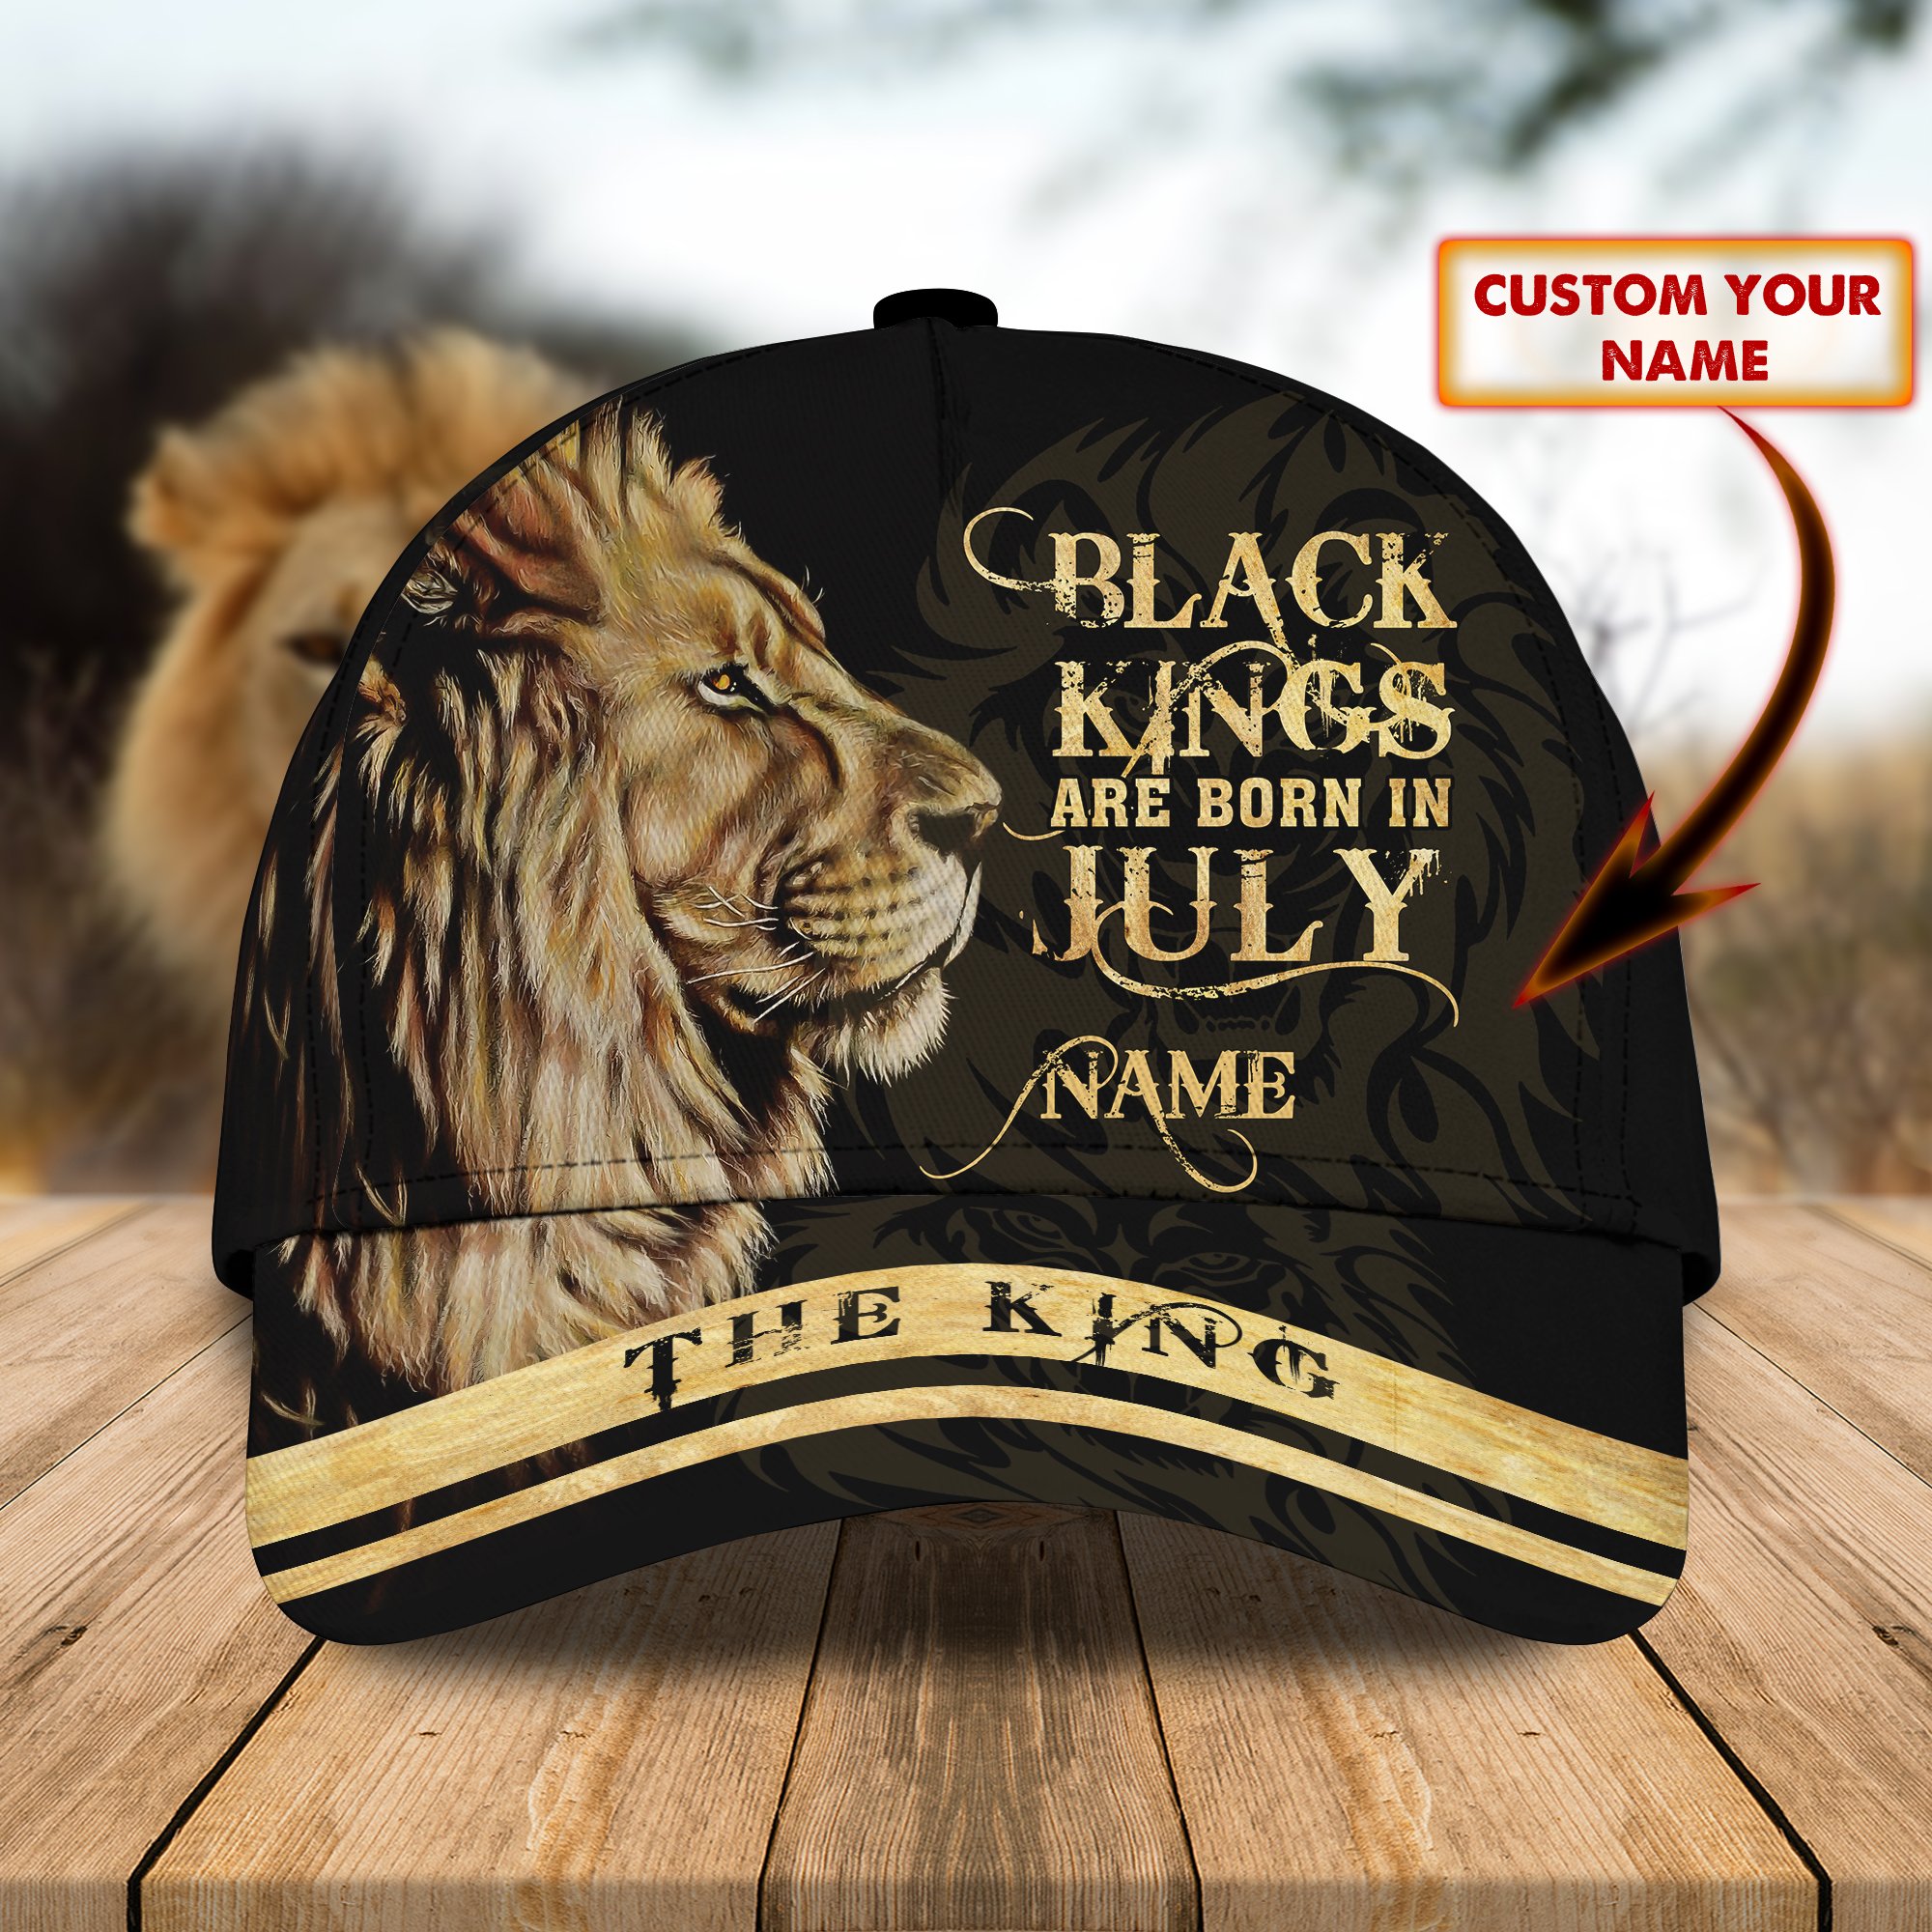 2 Lion Black Kings Are Born In July Personalized Name Cap 1